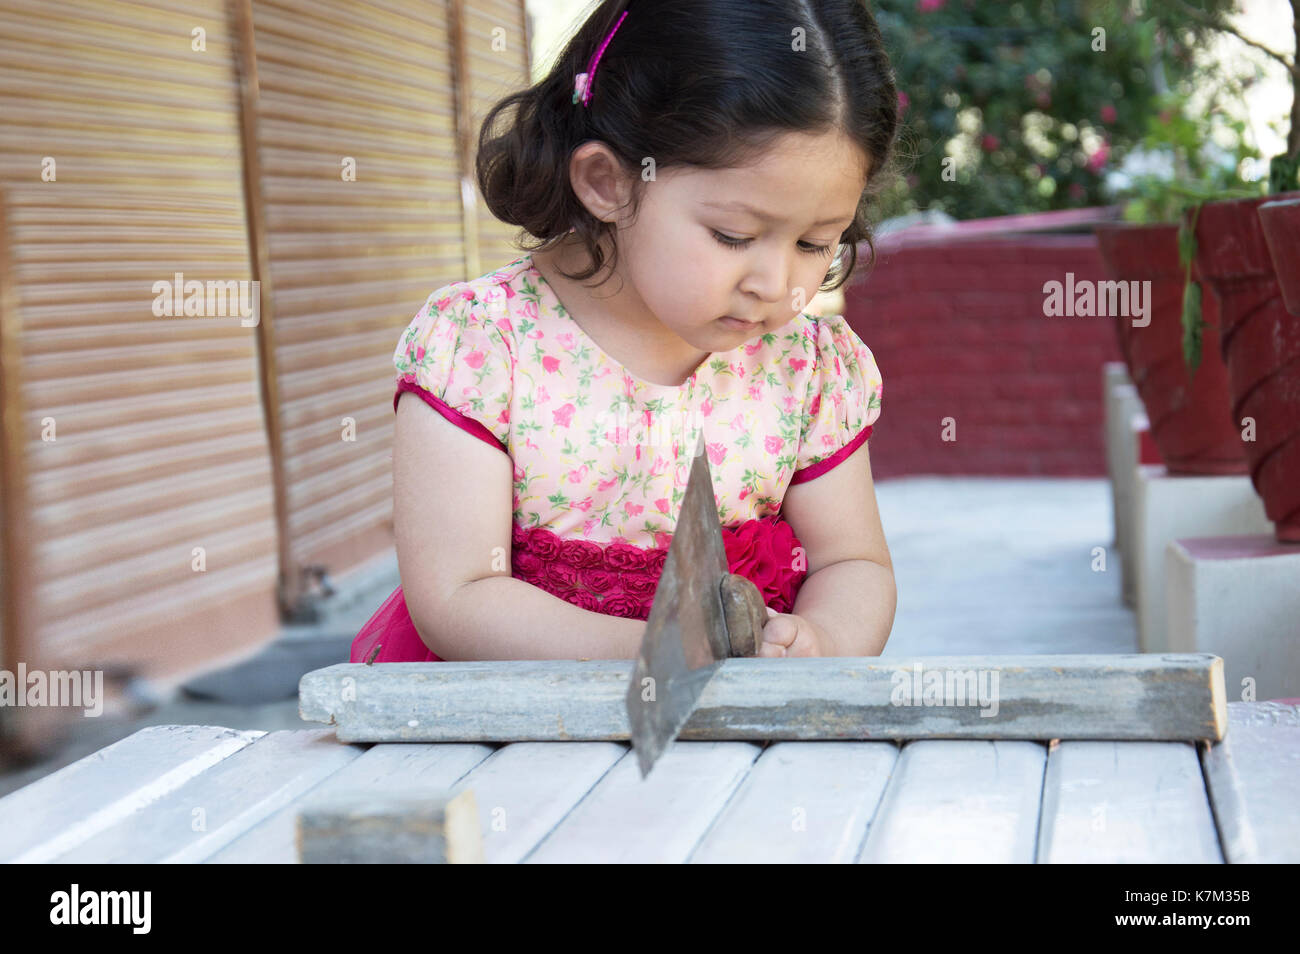 Little girl carpenter sawing wood plank with a handsaw outdoors. Indian, Asian. Stock Photo